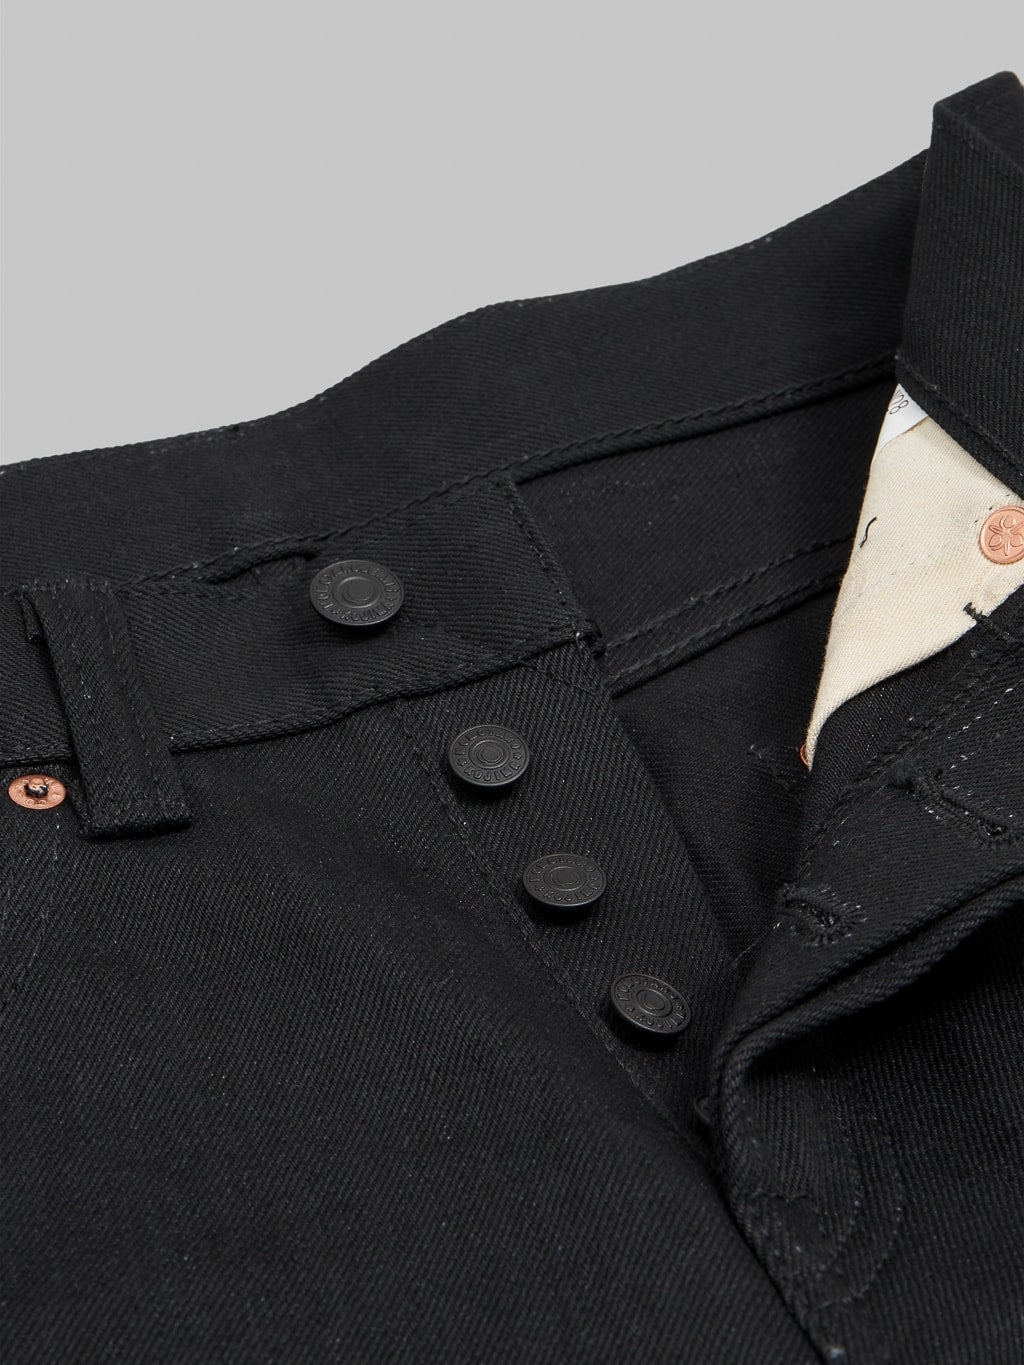 Momotaro 0605 B Black x Black Natural Tapered Jeans buttons